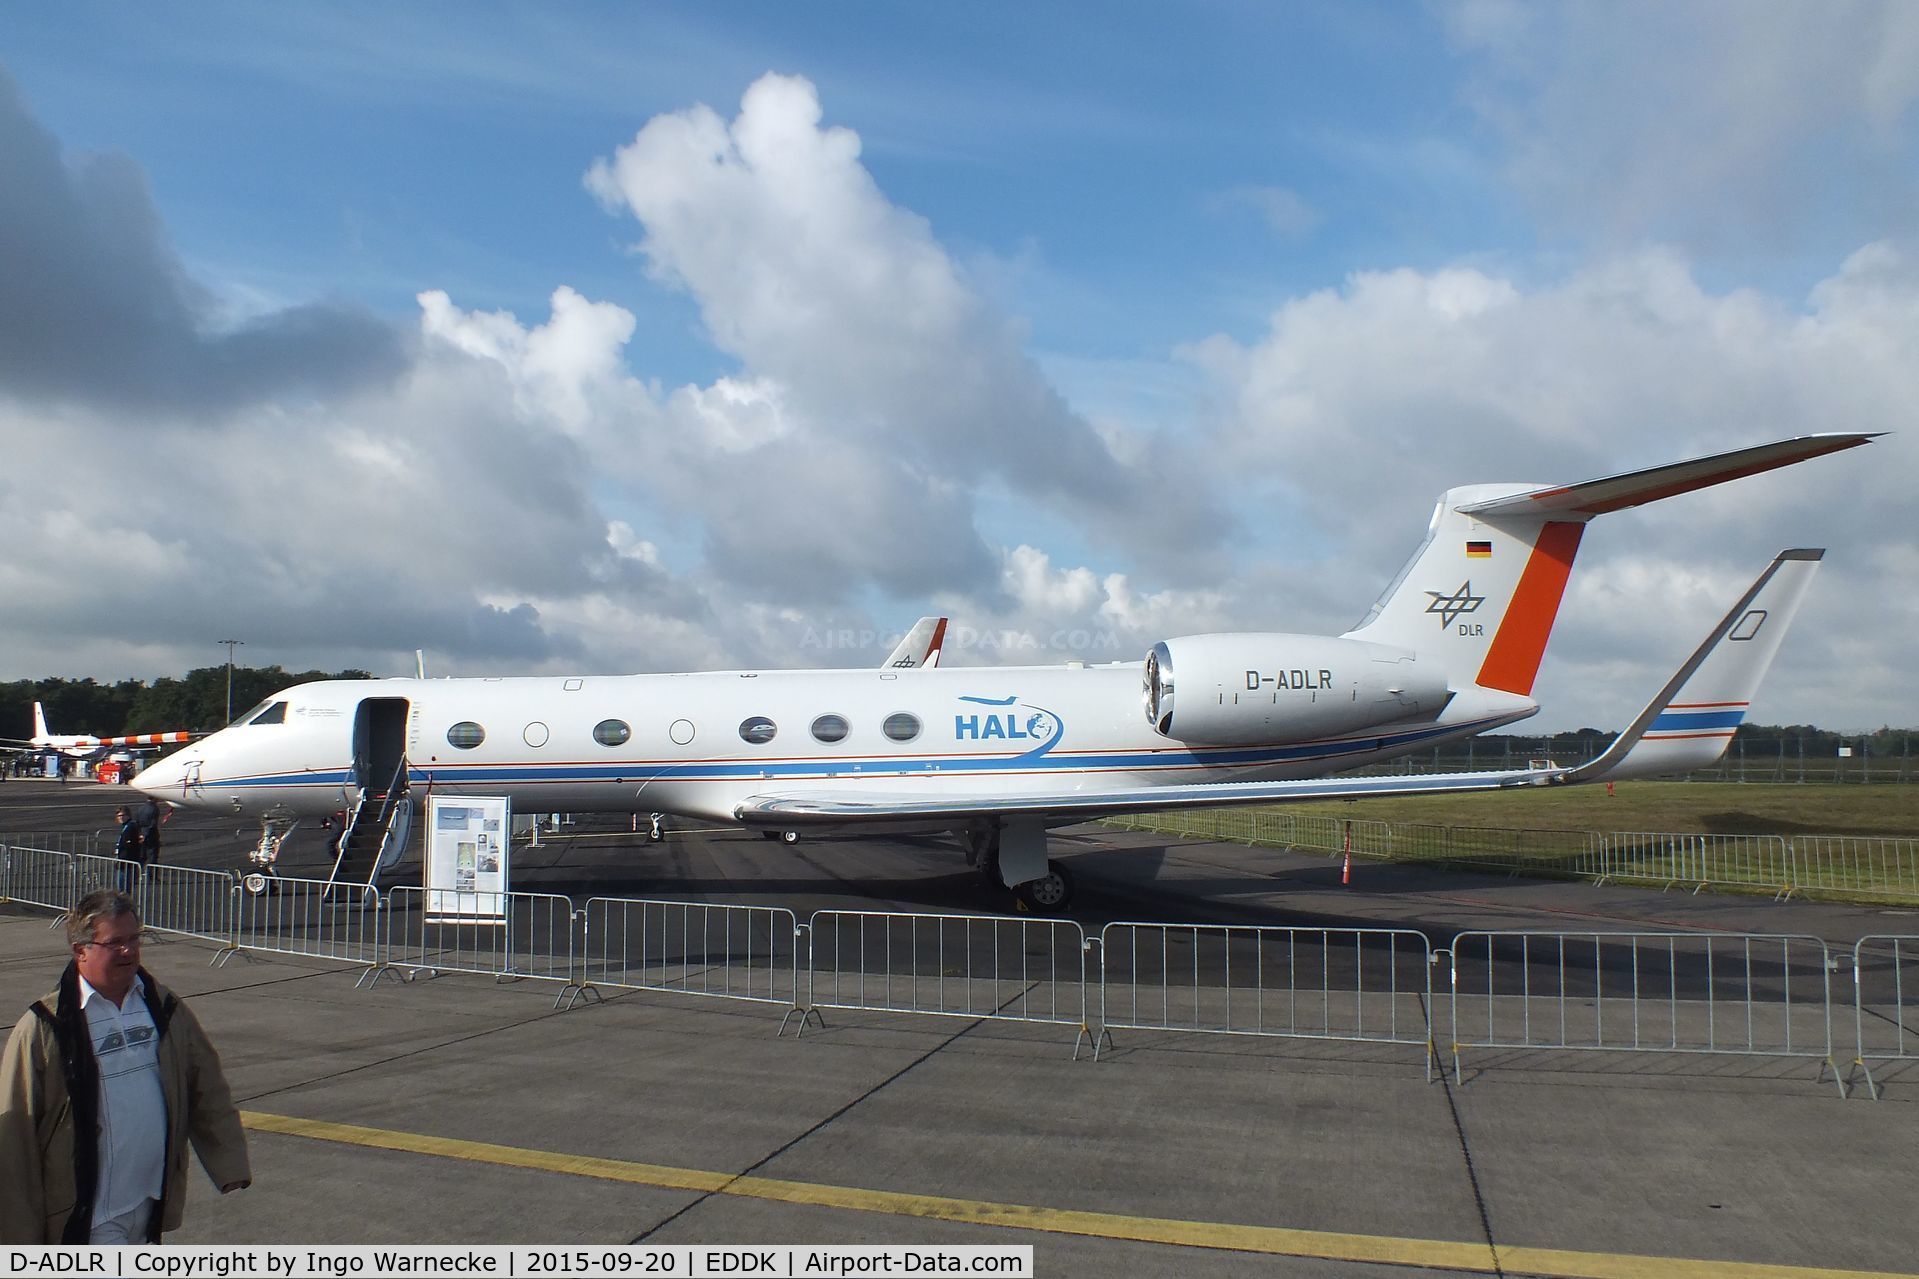 D-ADLR, 2006 Gulfstream Aerospace GV-SP (G550) C/N 5093, Gulfstream Aerospace V-SP G55O HALO research aircraft of DLR at the DLR 2015 air and space day on the side of Cologne airport